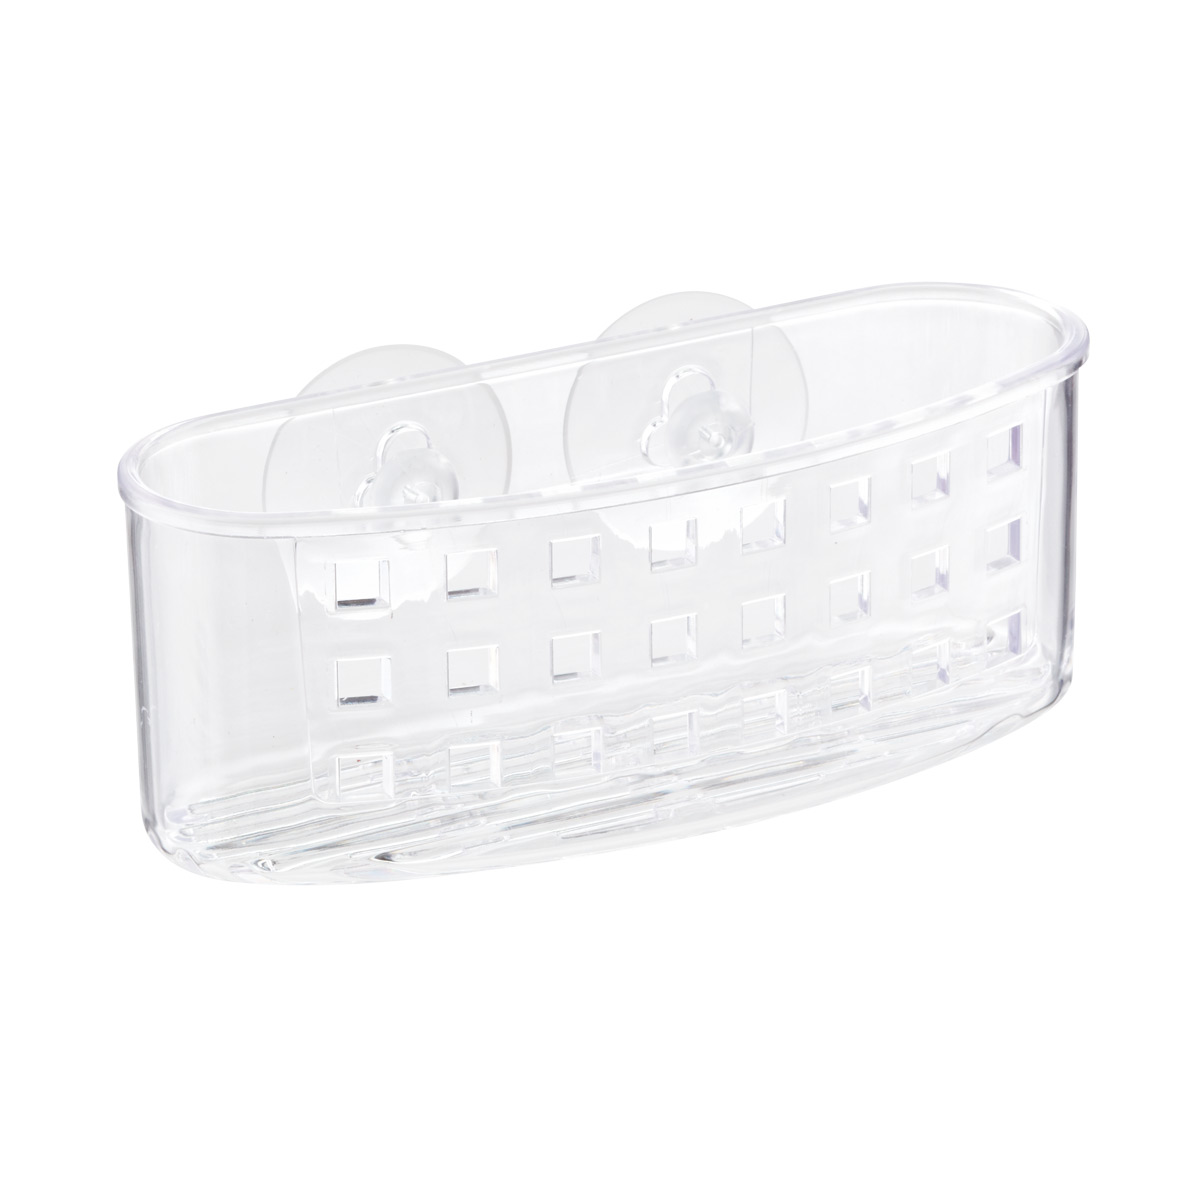 https://www.containerstore.com/catalogimages/332869/428141-suction-sink-center-clear.jpg